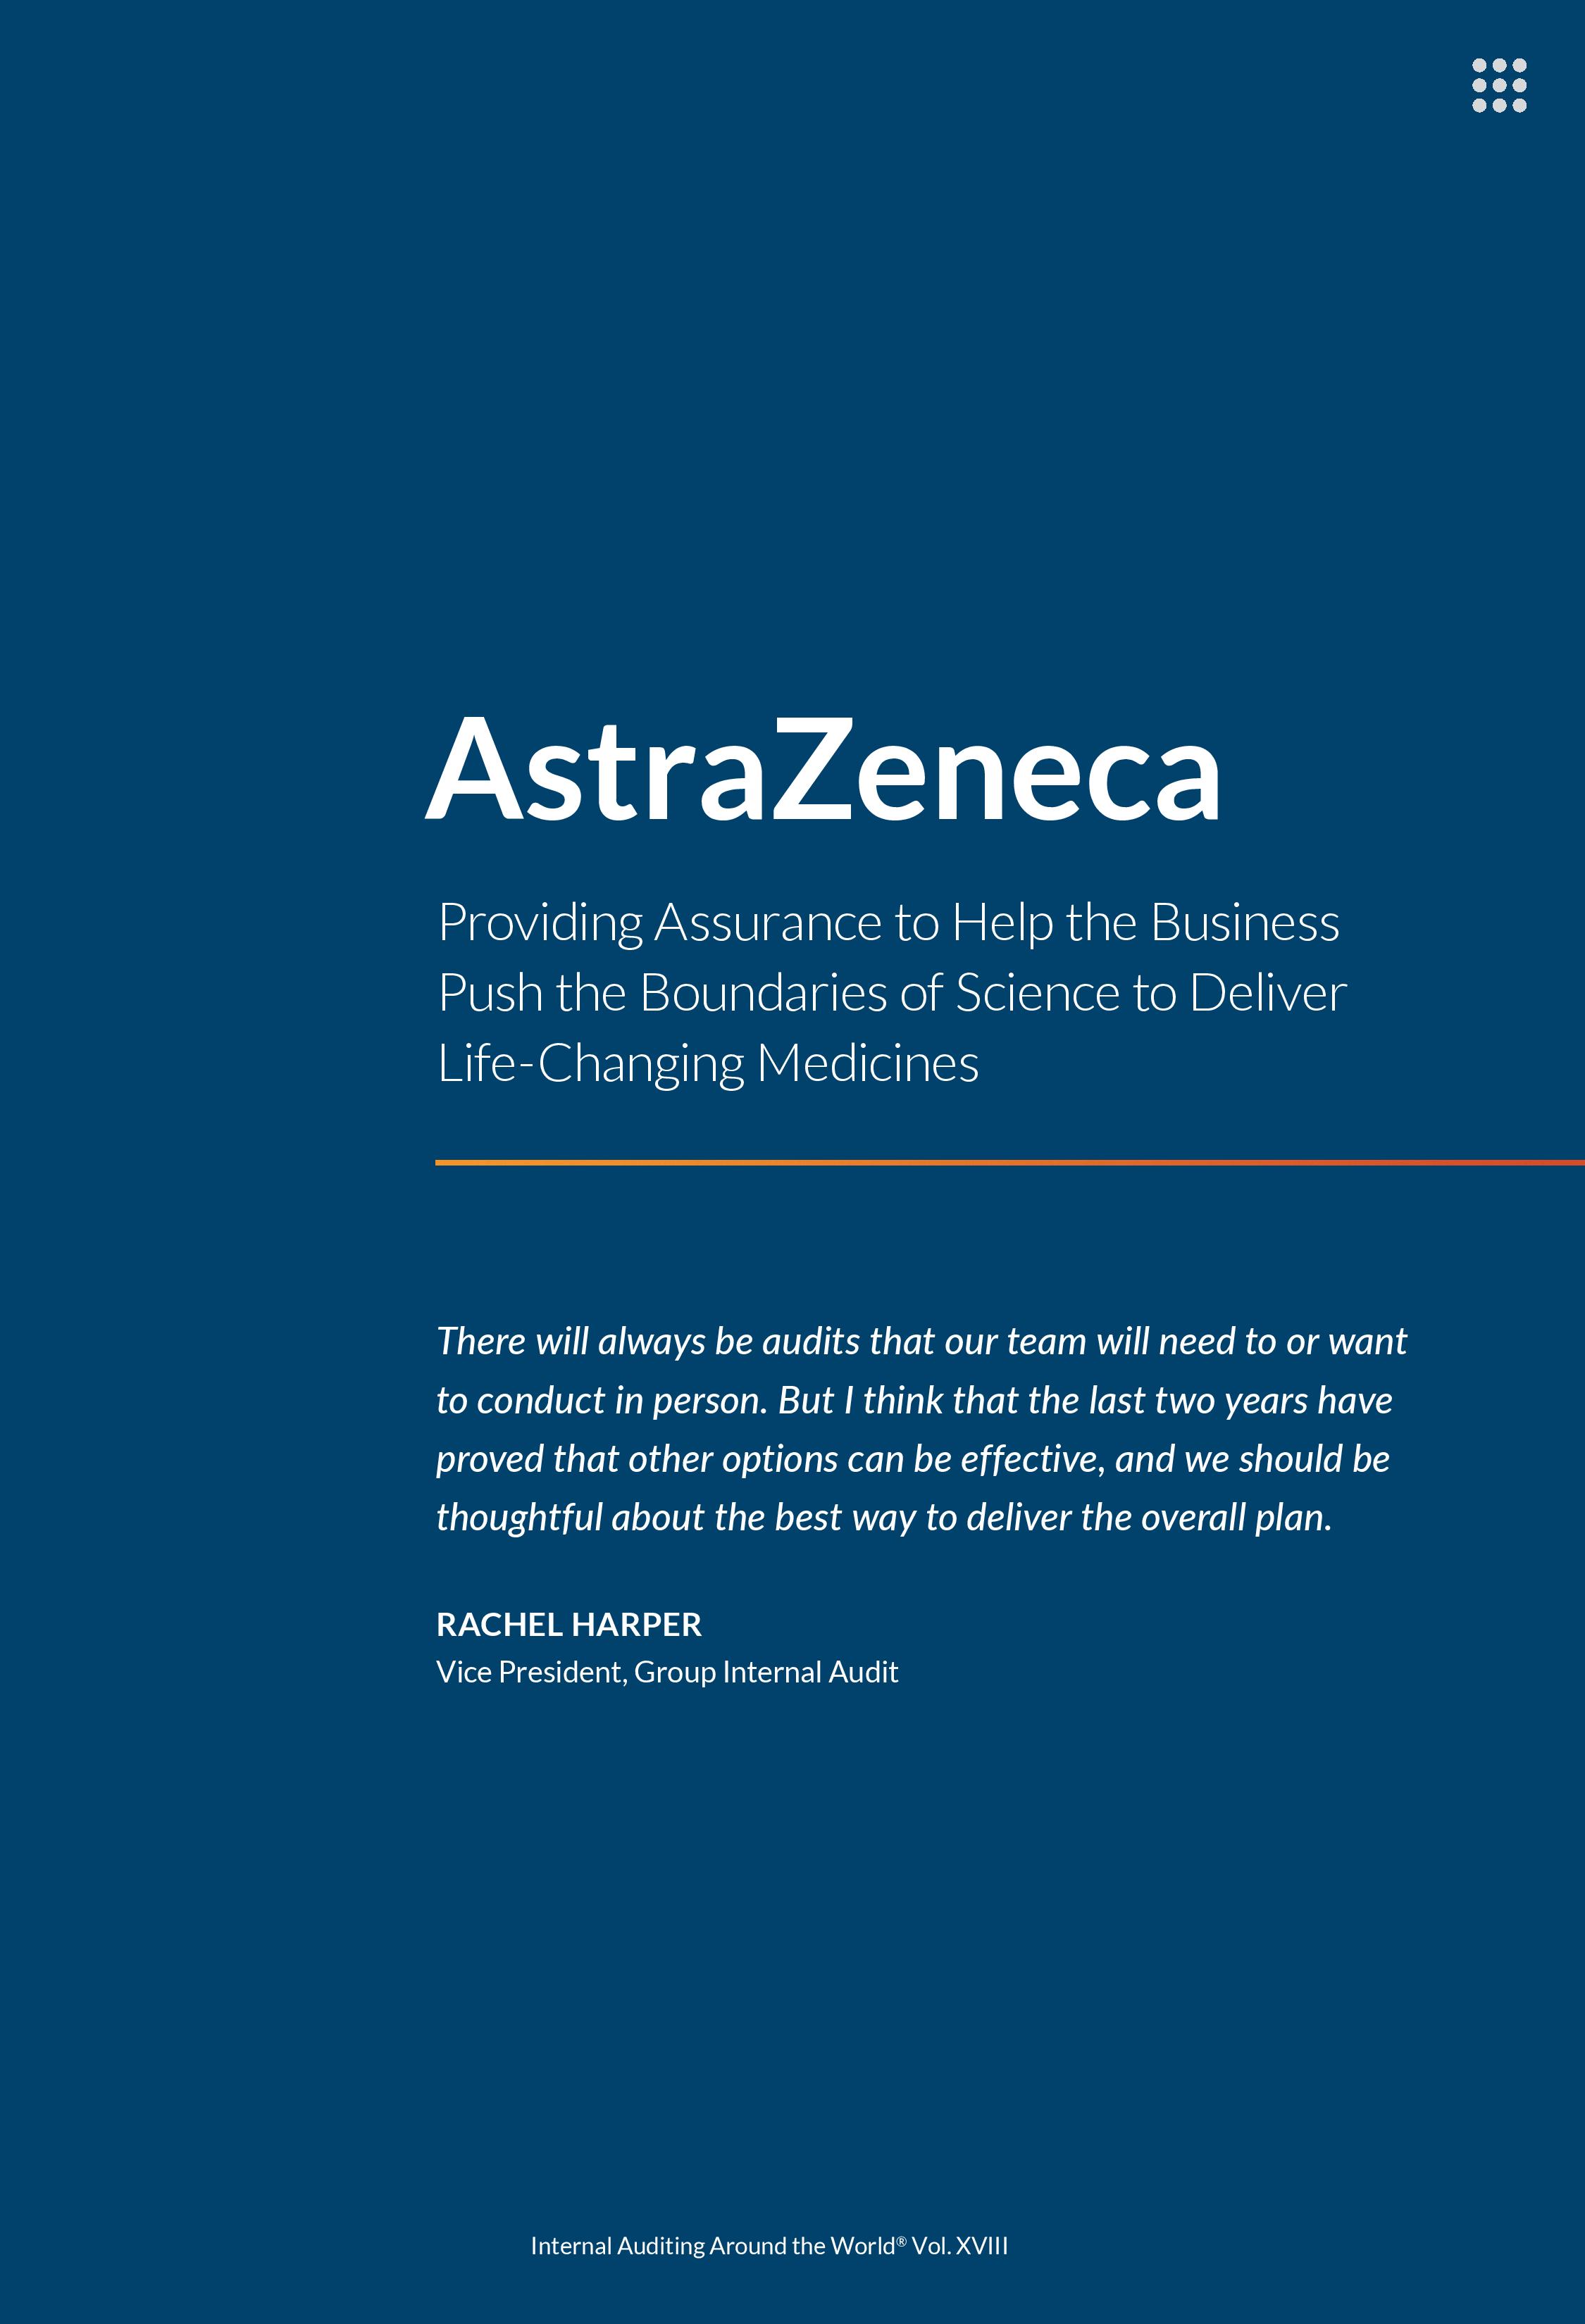 Screenshot of the First Page of AstraZeneca Performer Profile 